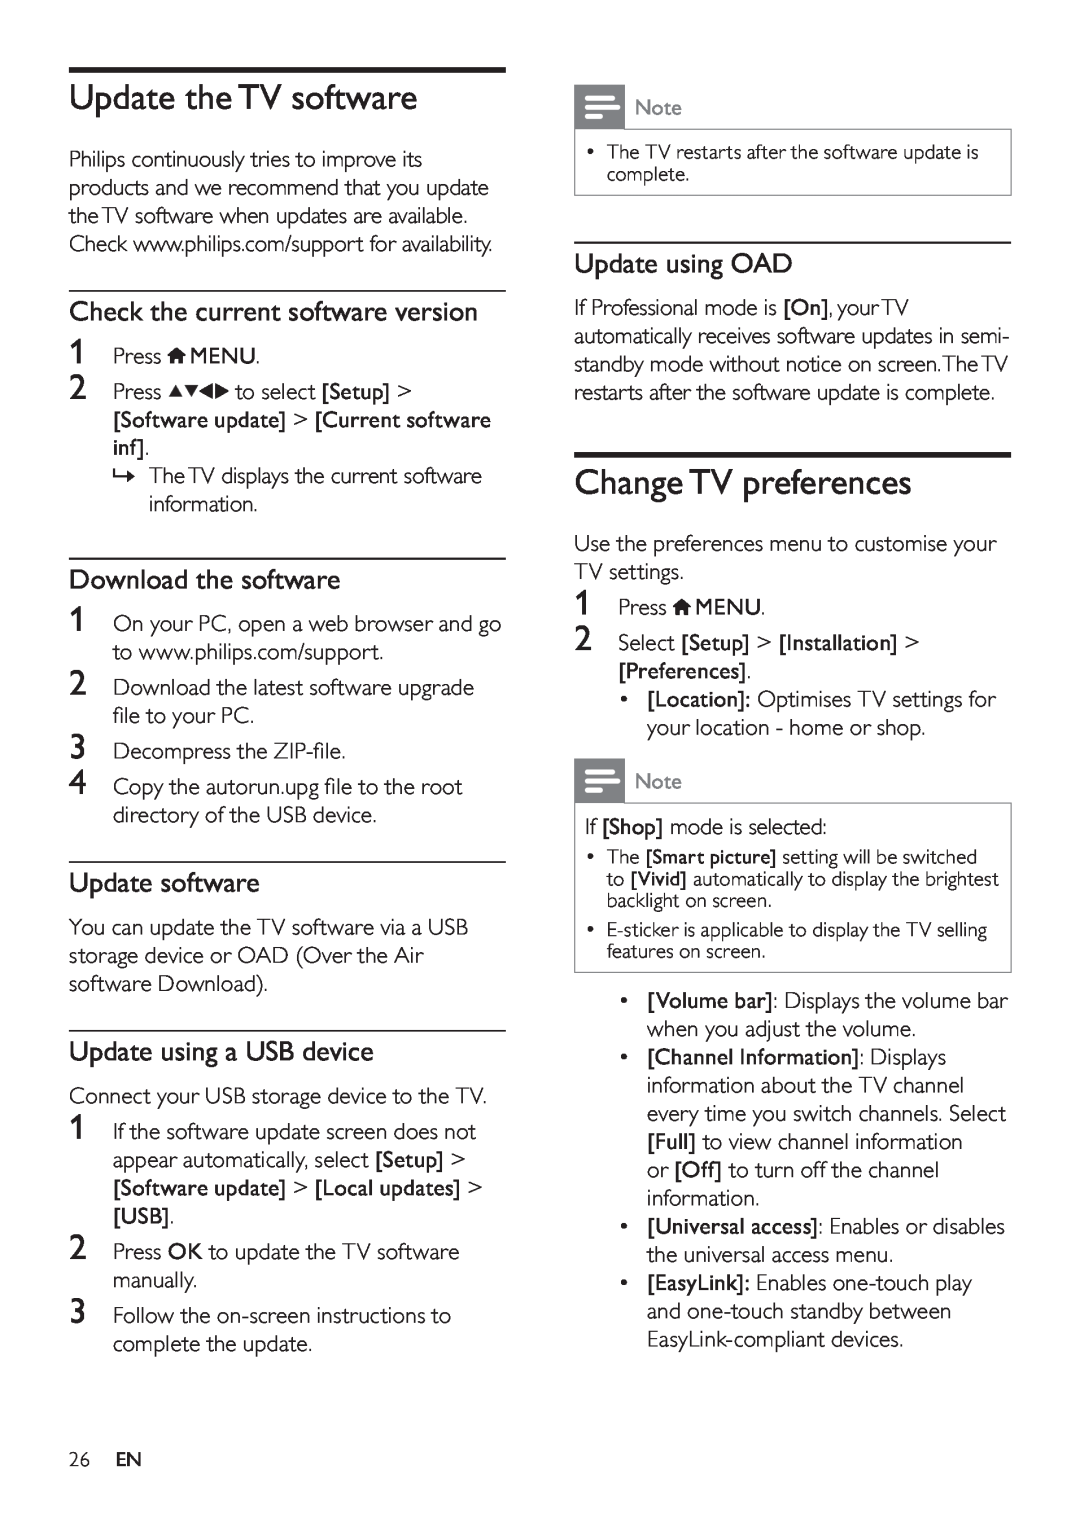 Philips 26HFL3232D/10 Update the TV software, Change TV preferences, Check the current software version, Update software 